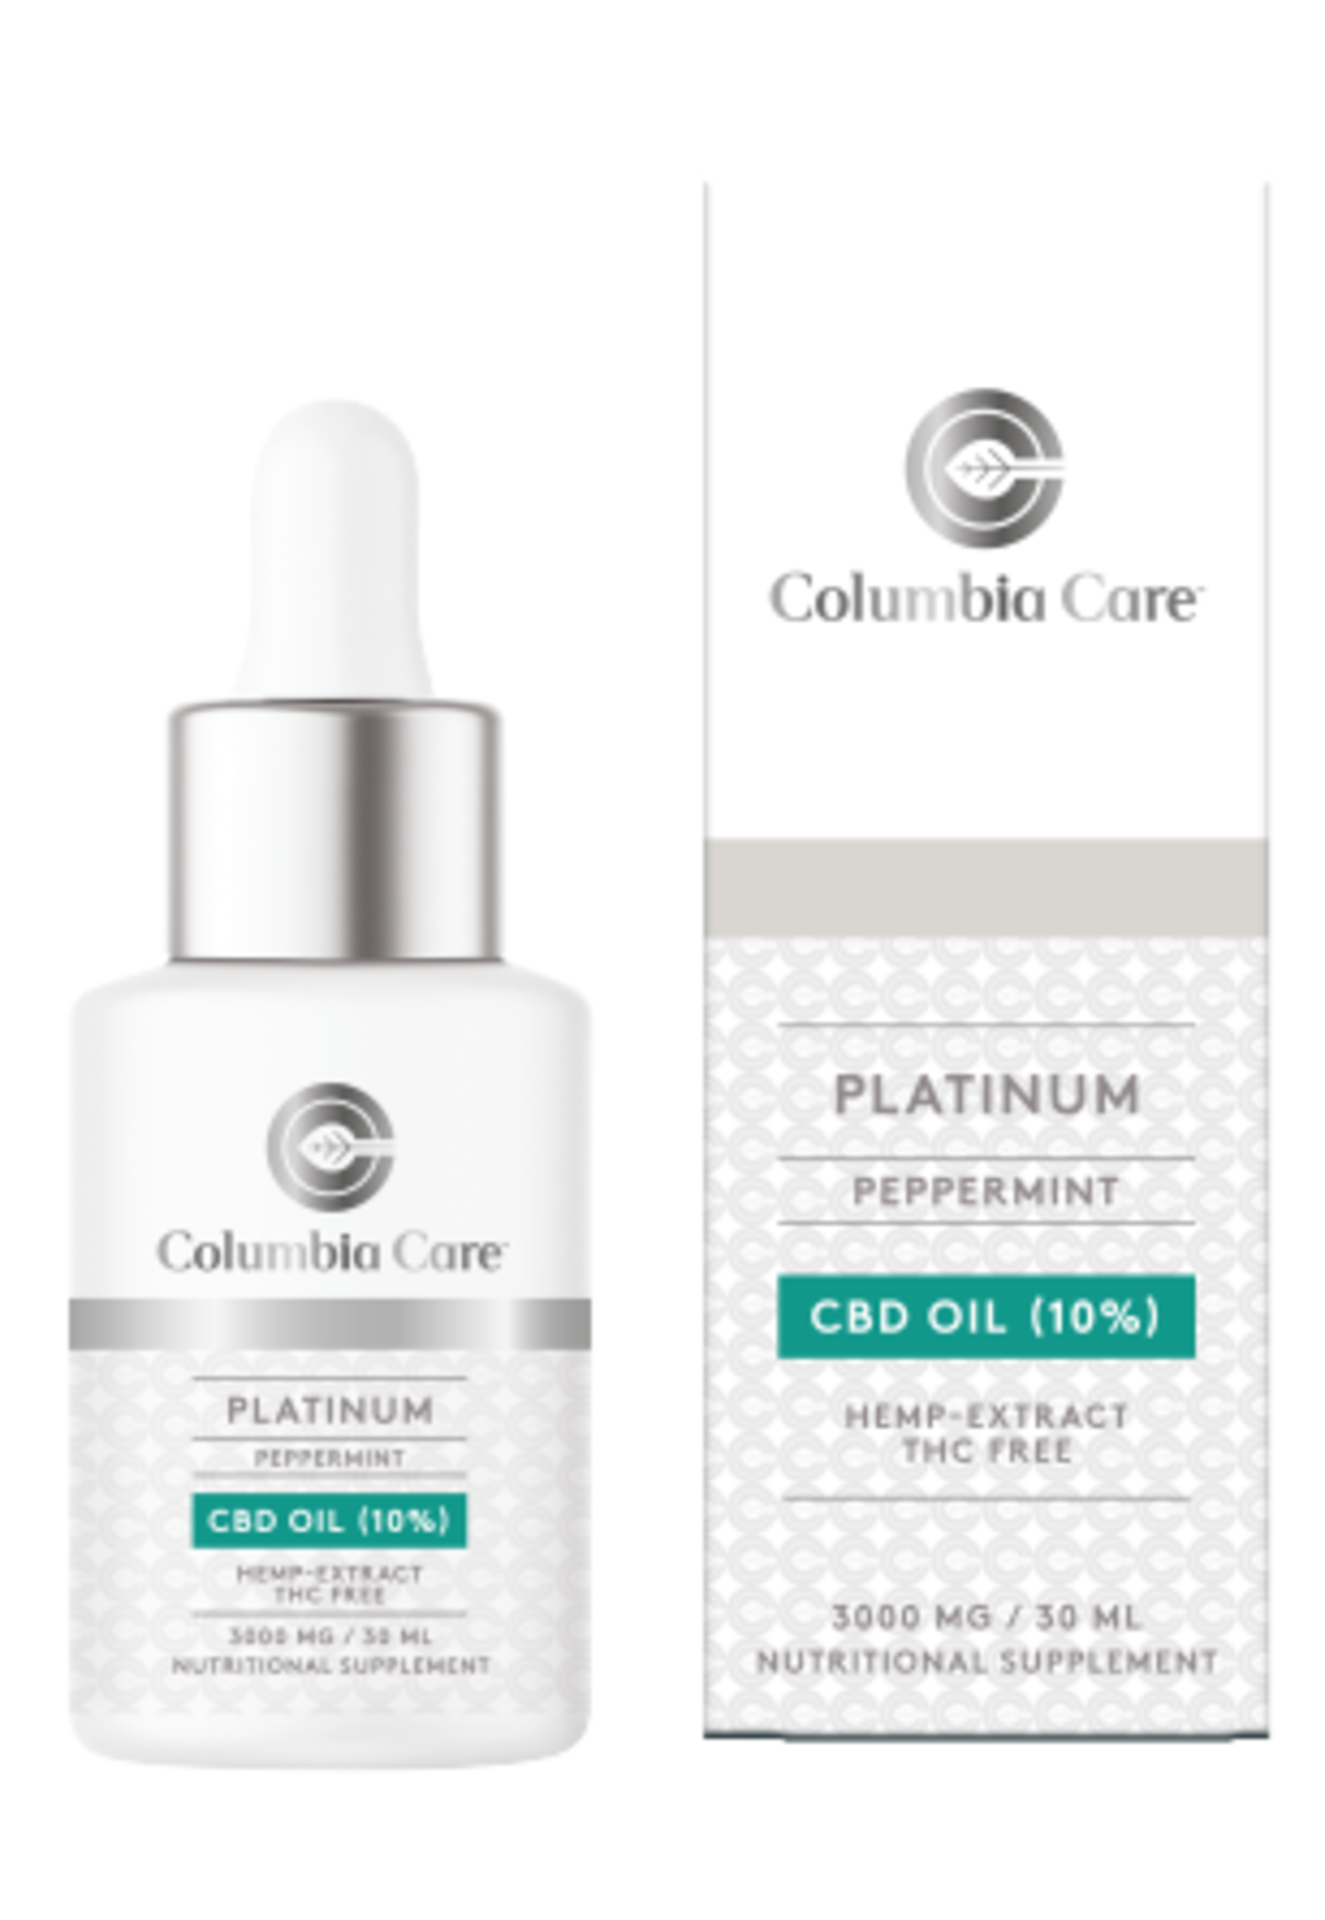 5 x Brand New Columbia Care Platinum Peppermint Flavored Tincture 30ml 3000mg. Columbia Care, a